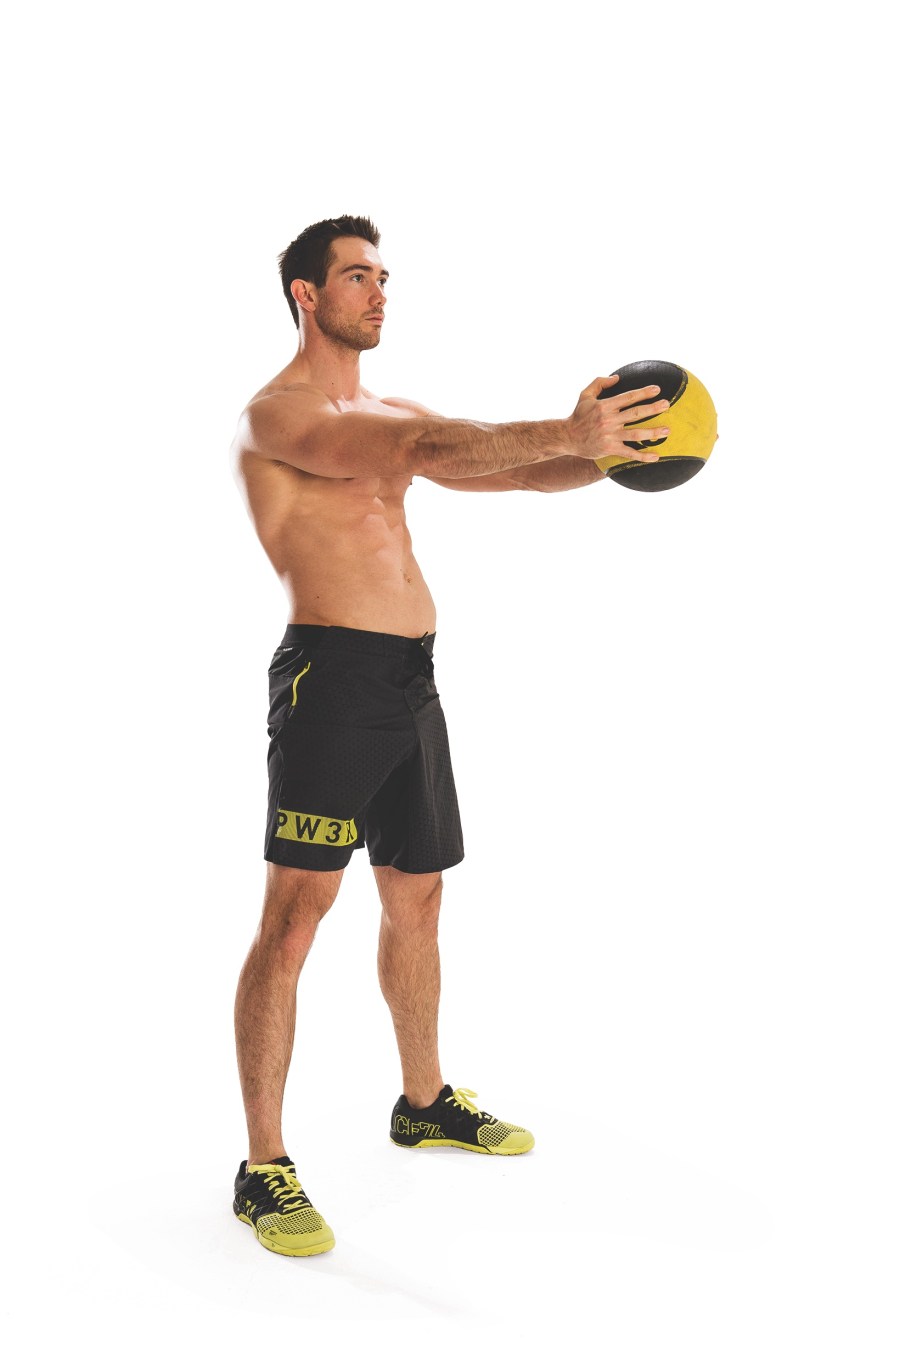 Bodyweight Supersets Workout For Functional Strength & Fat Loss | Men's Fitness UK